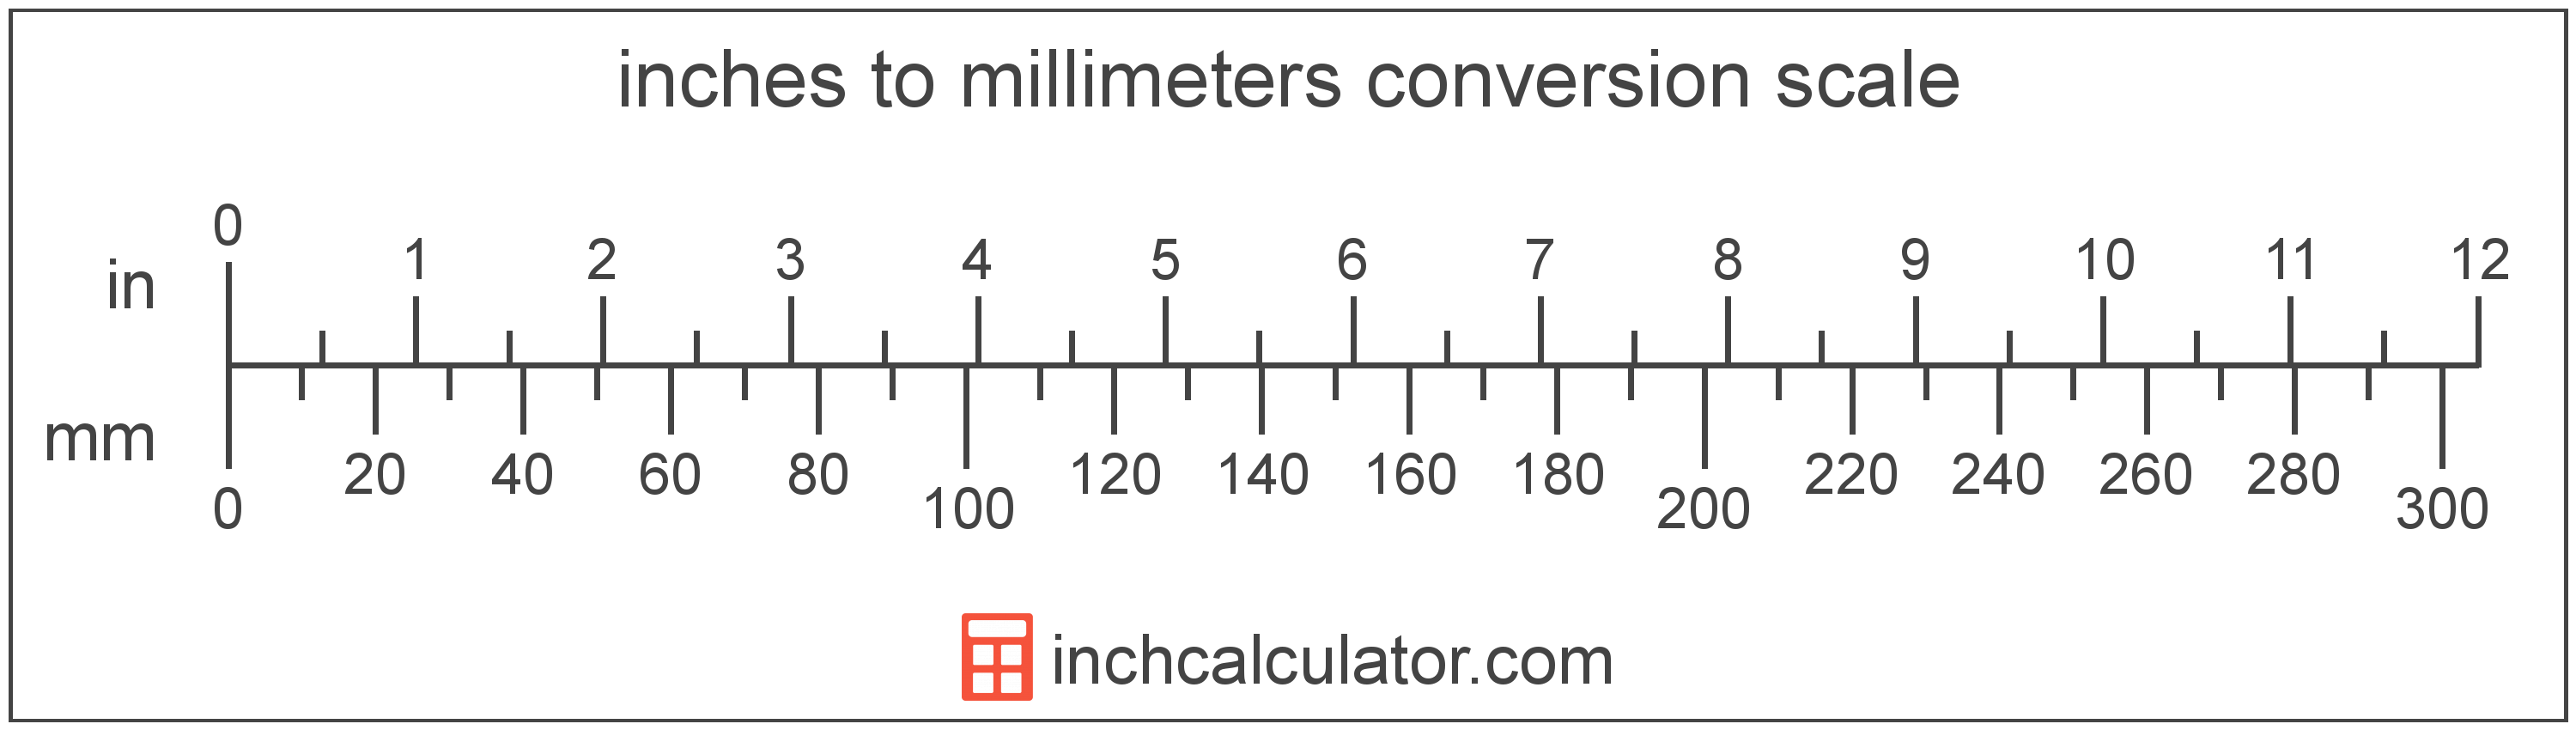 conversion scale showing inches and equivalent millimeters length values